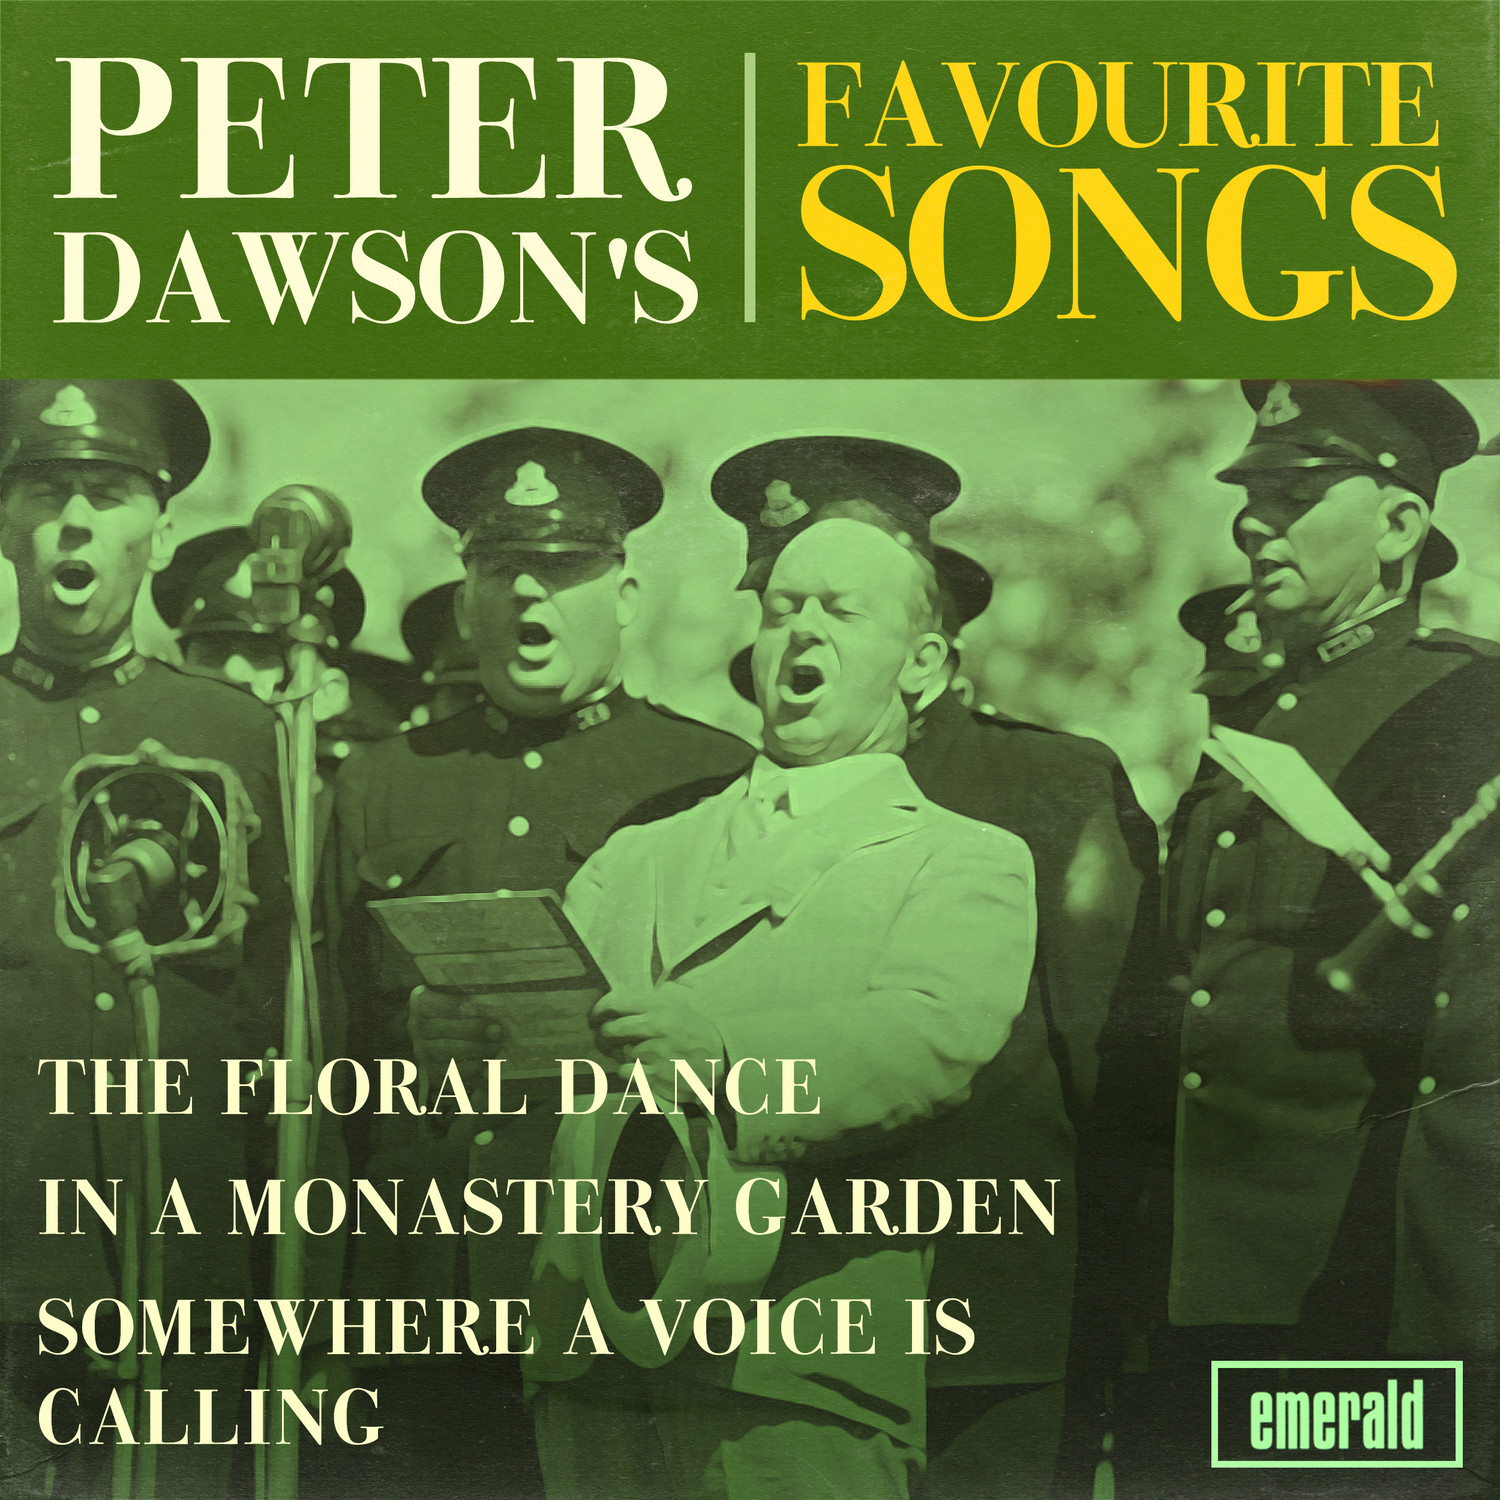 Peter Dawson's Favourite Songs